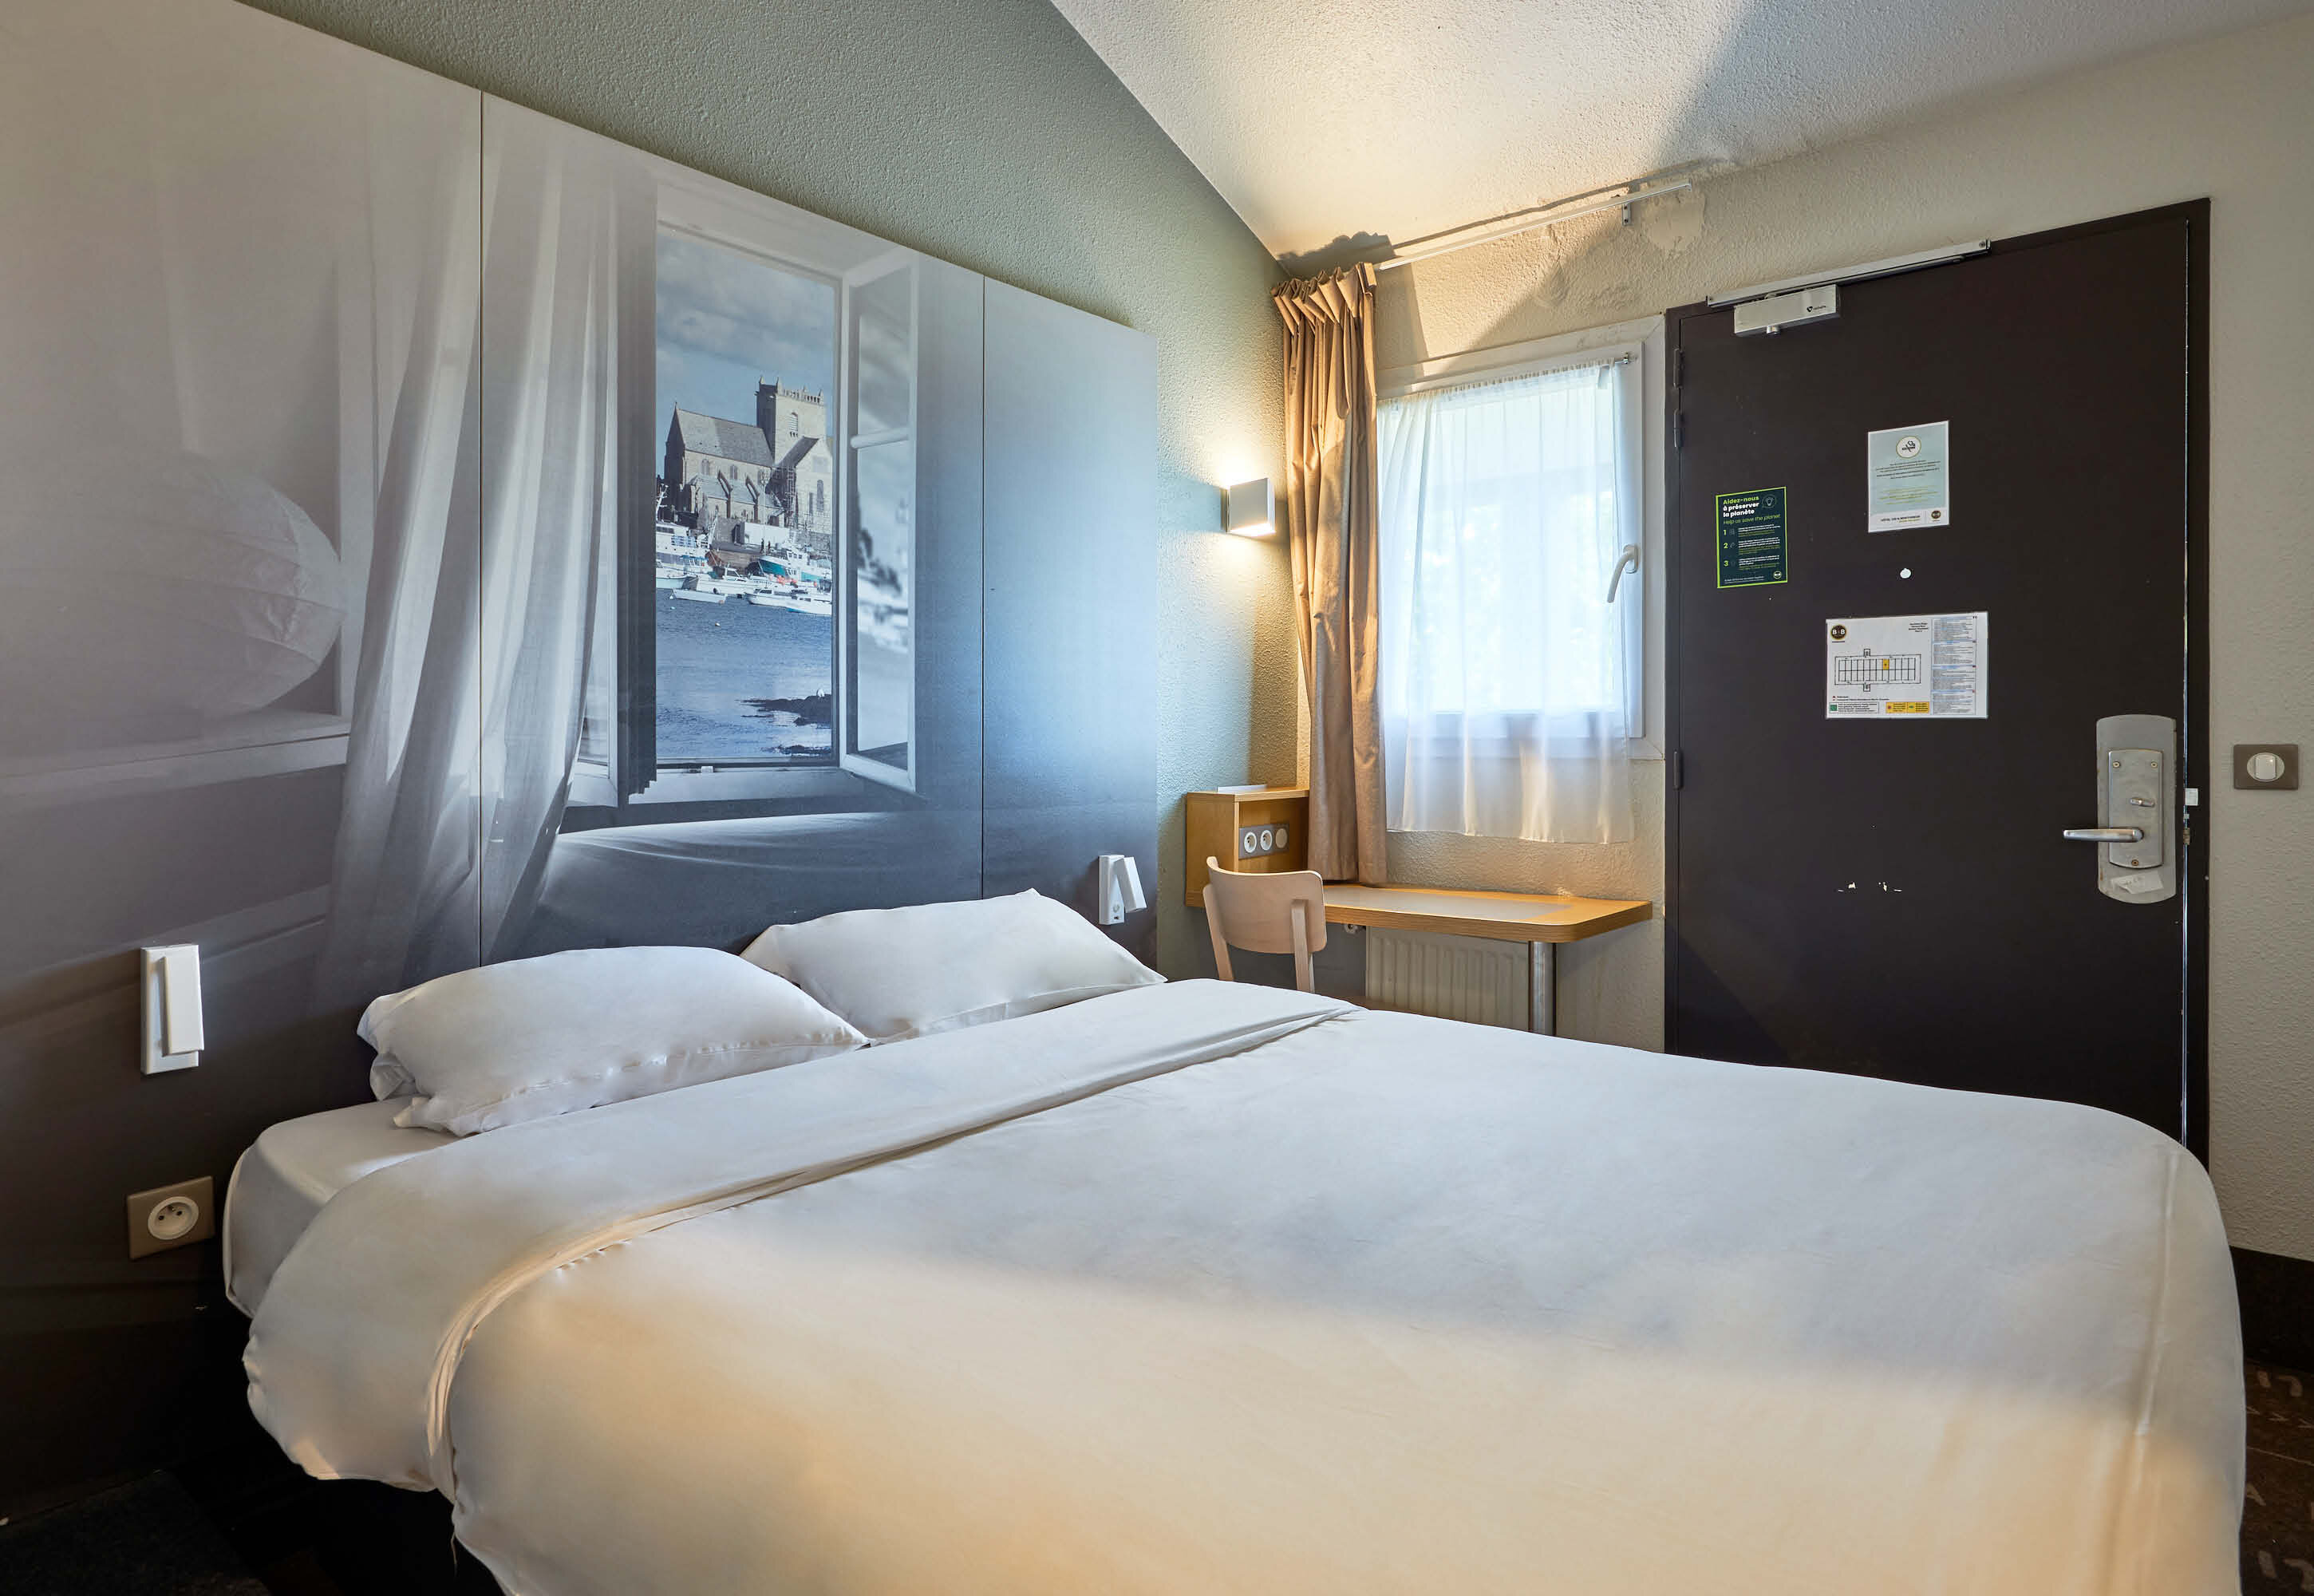 Images B&B HOTEL Cherbourg